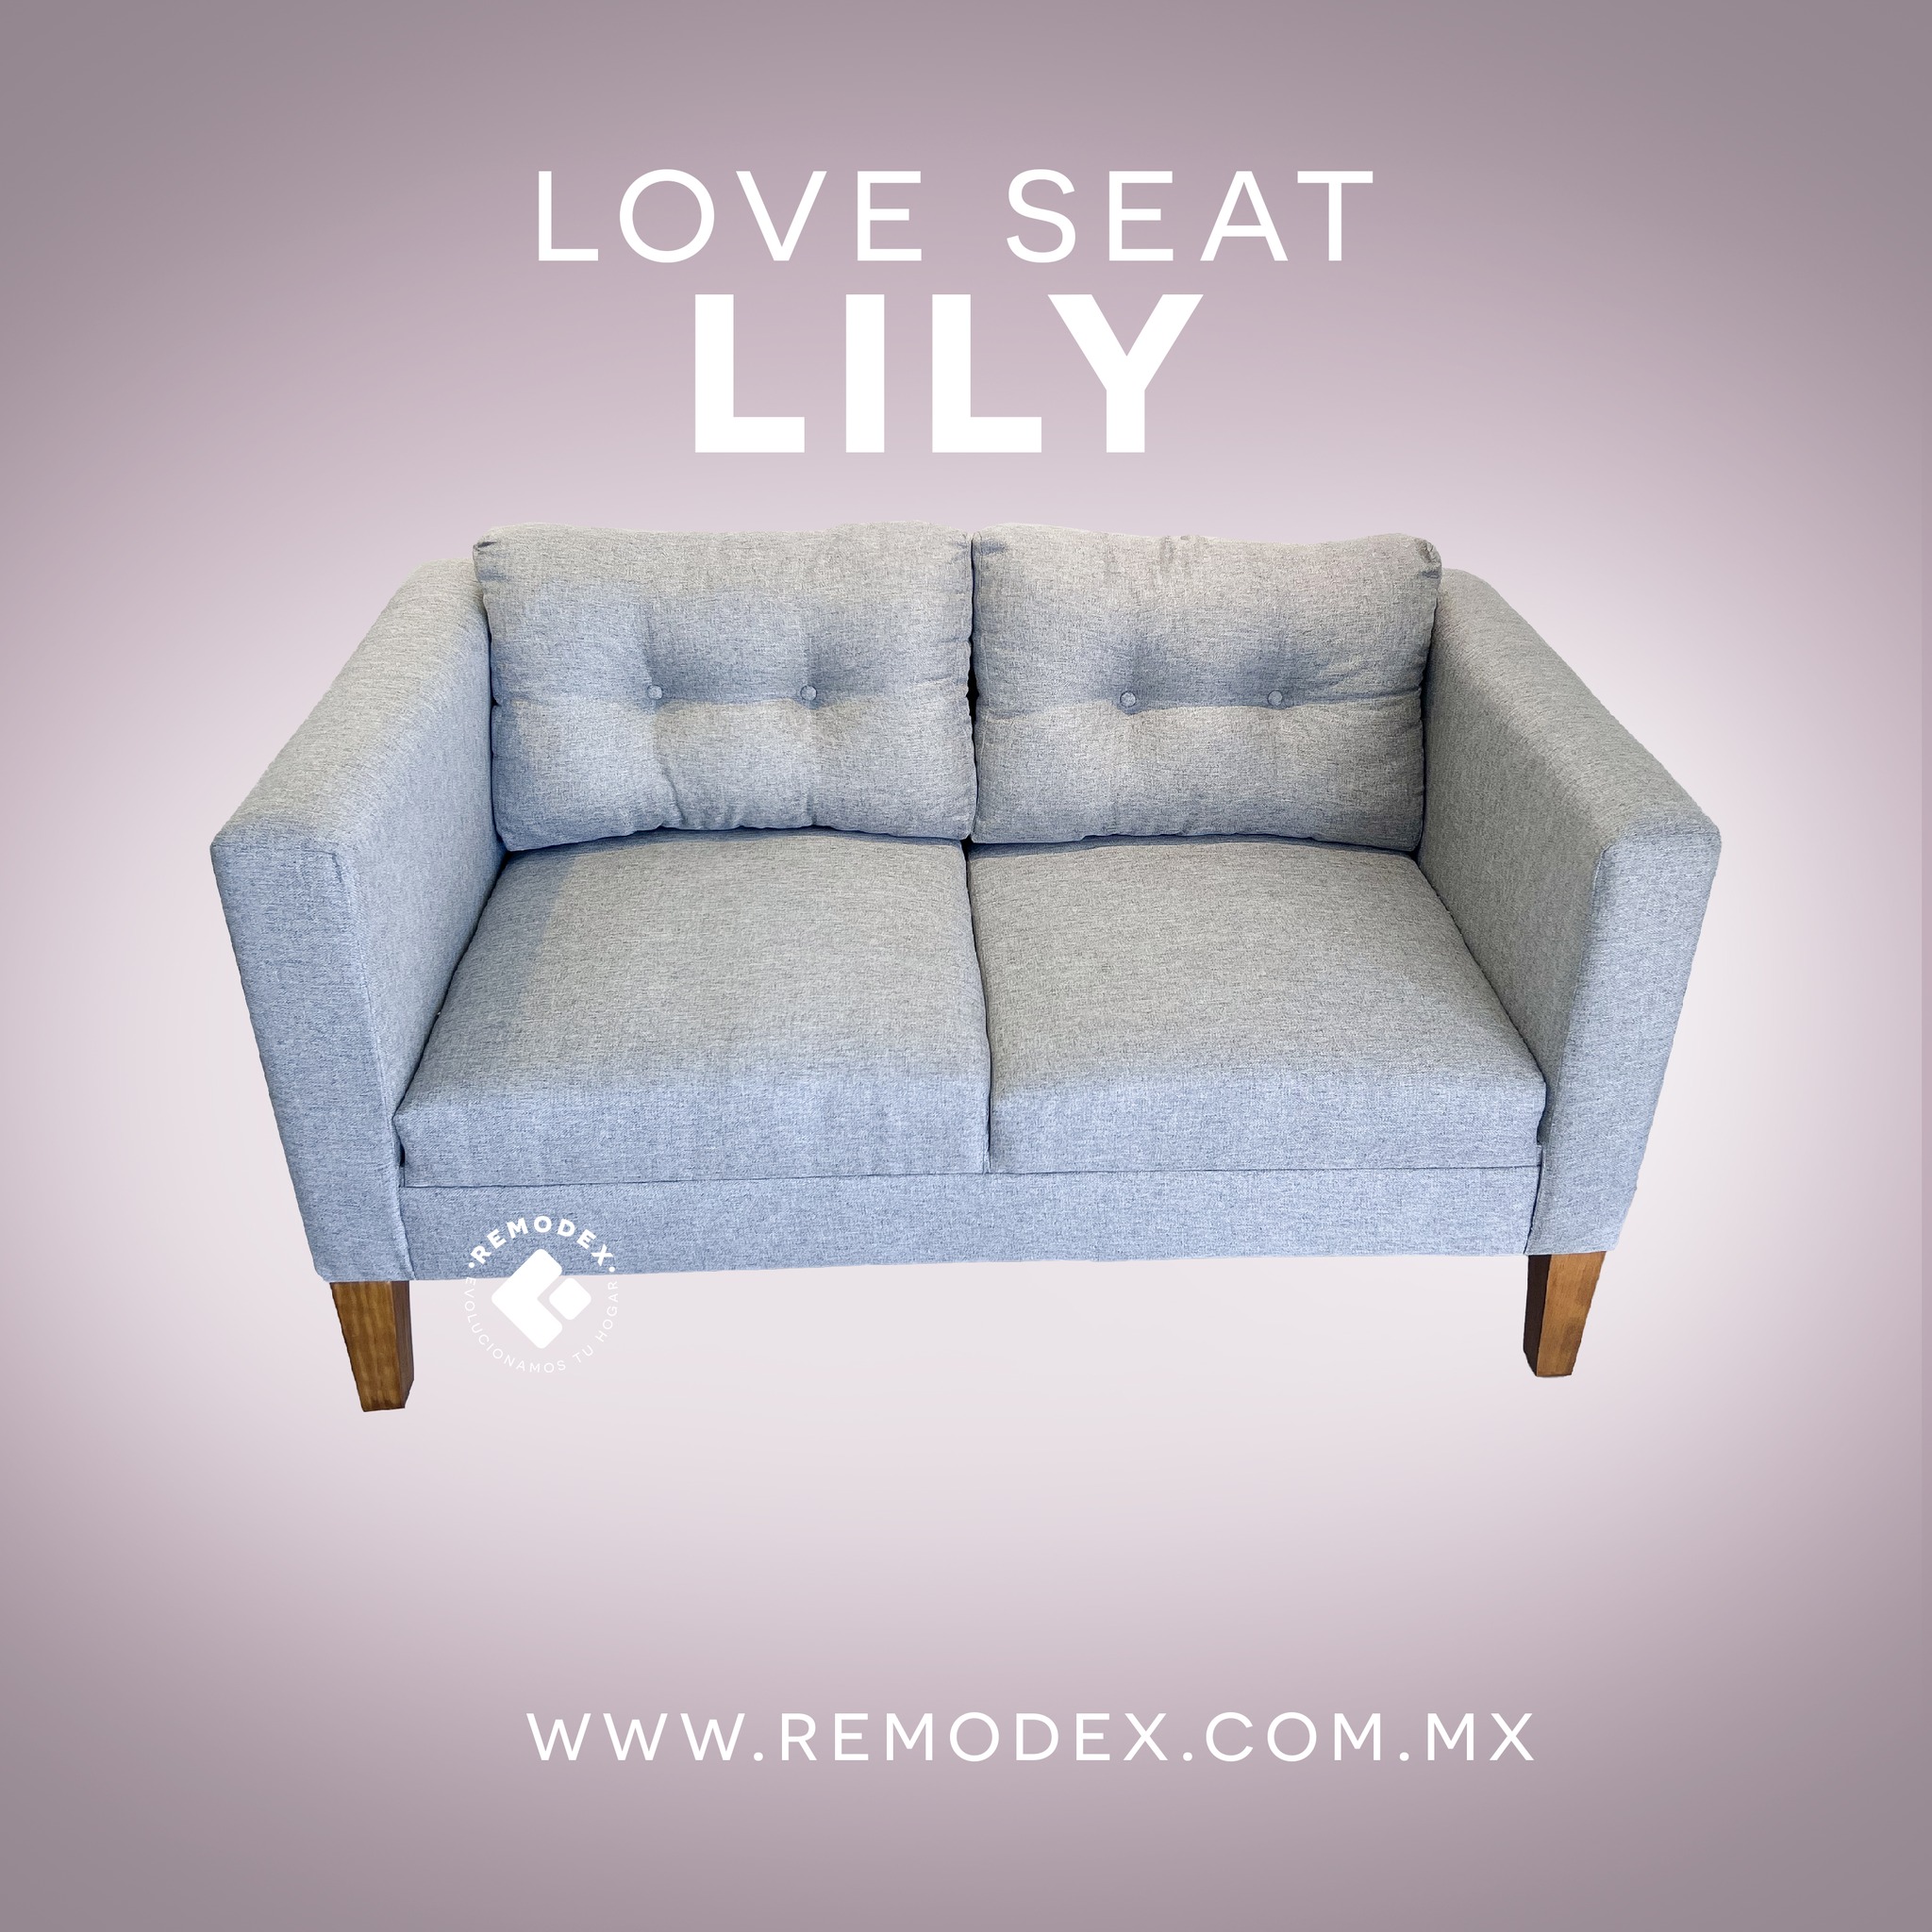 LOVE SEAT LILY